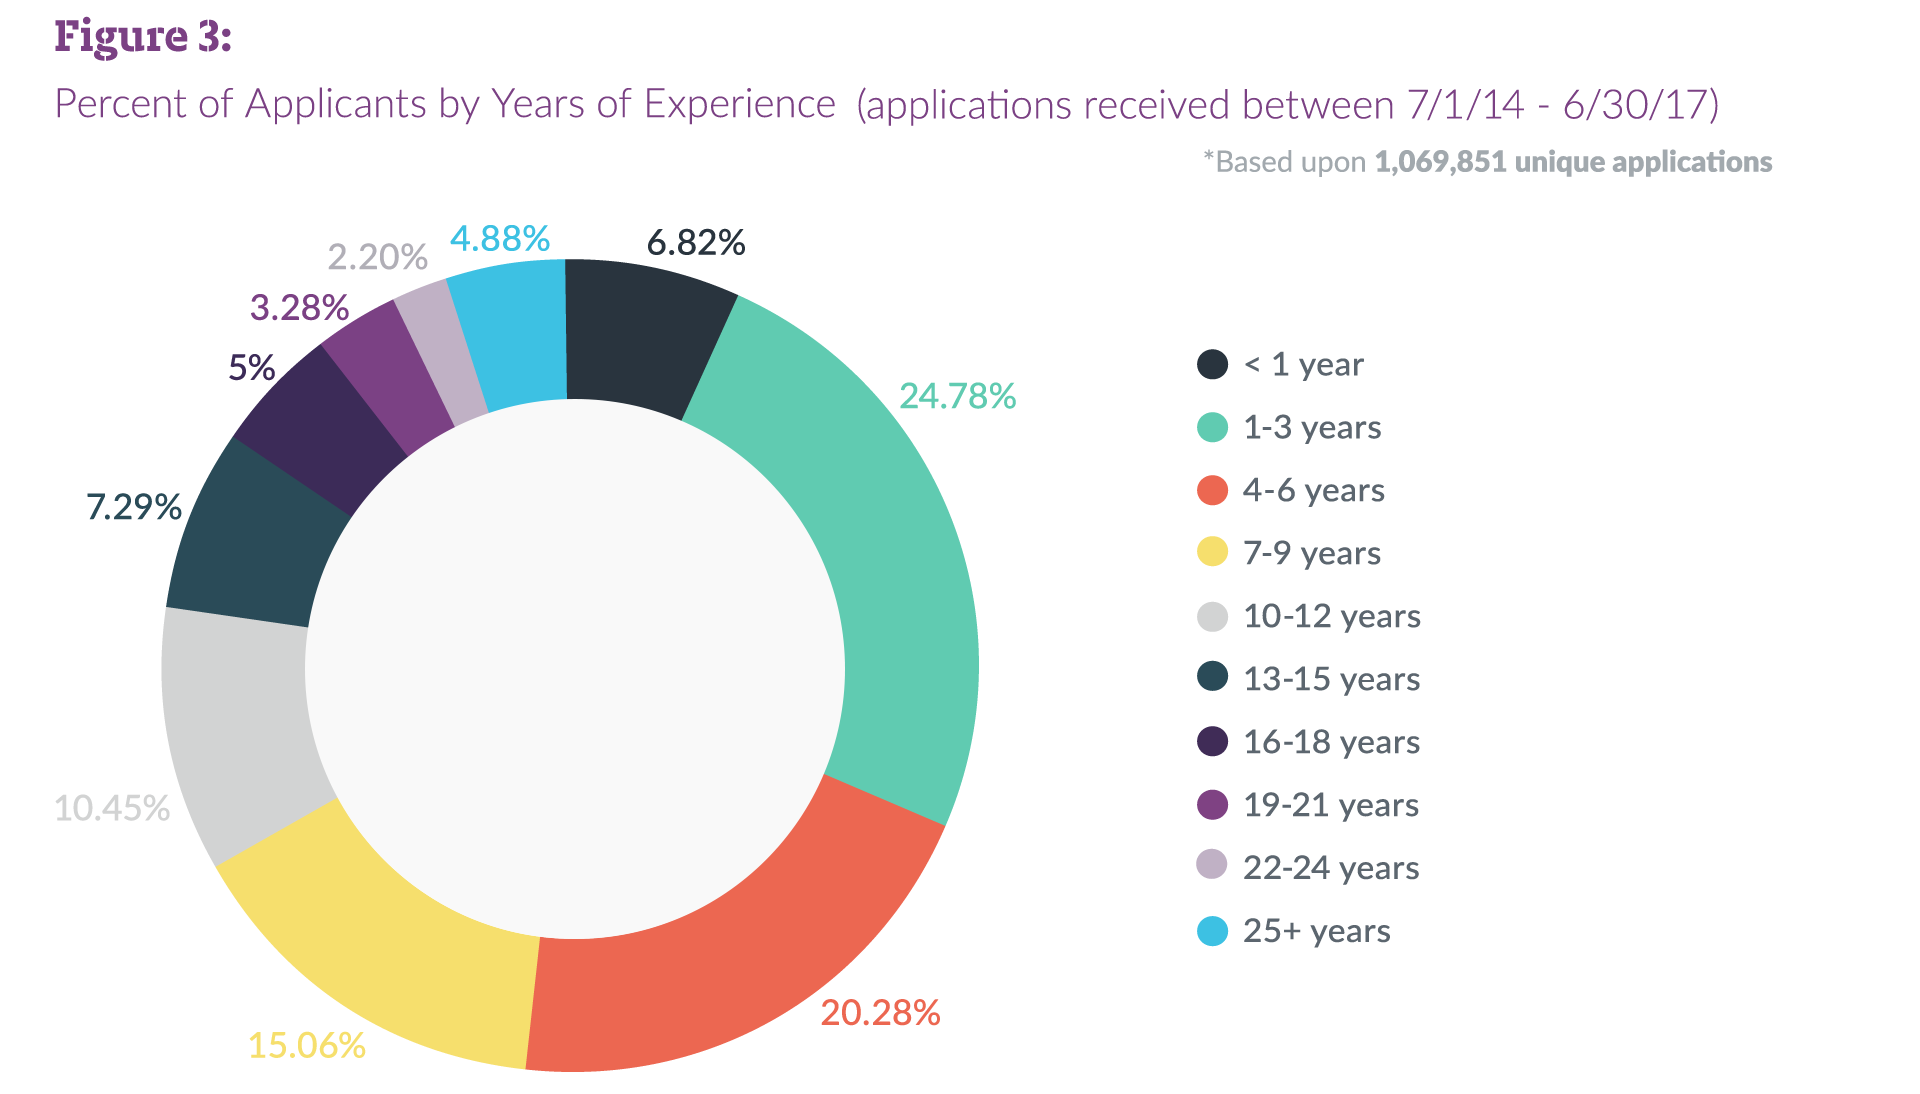 Chart showing breakdown of percent of applicants by years of experience from July 2014 through June 2017